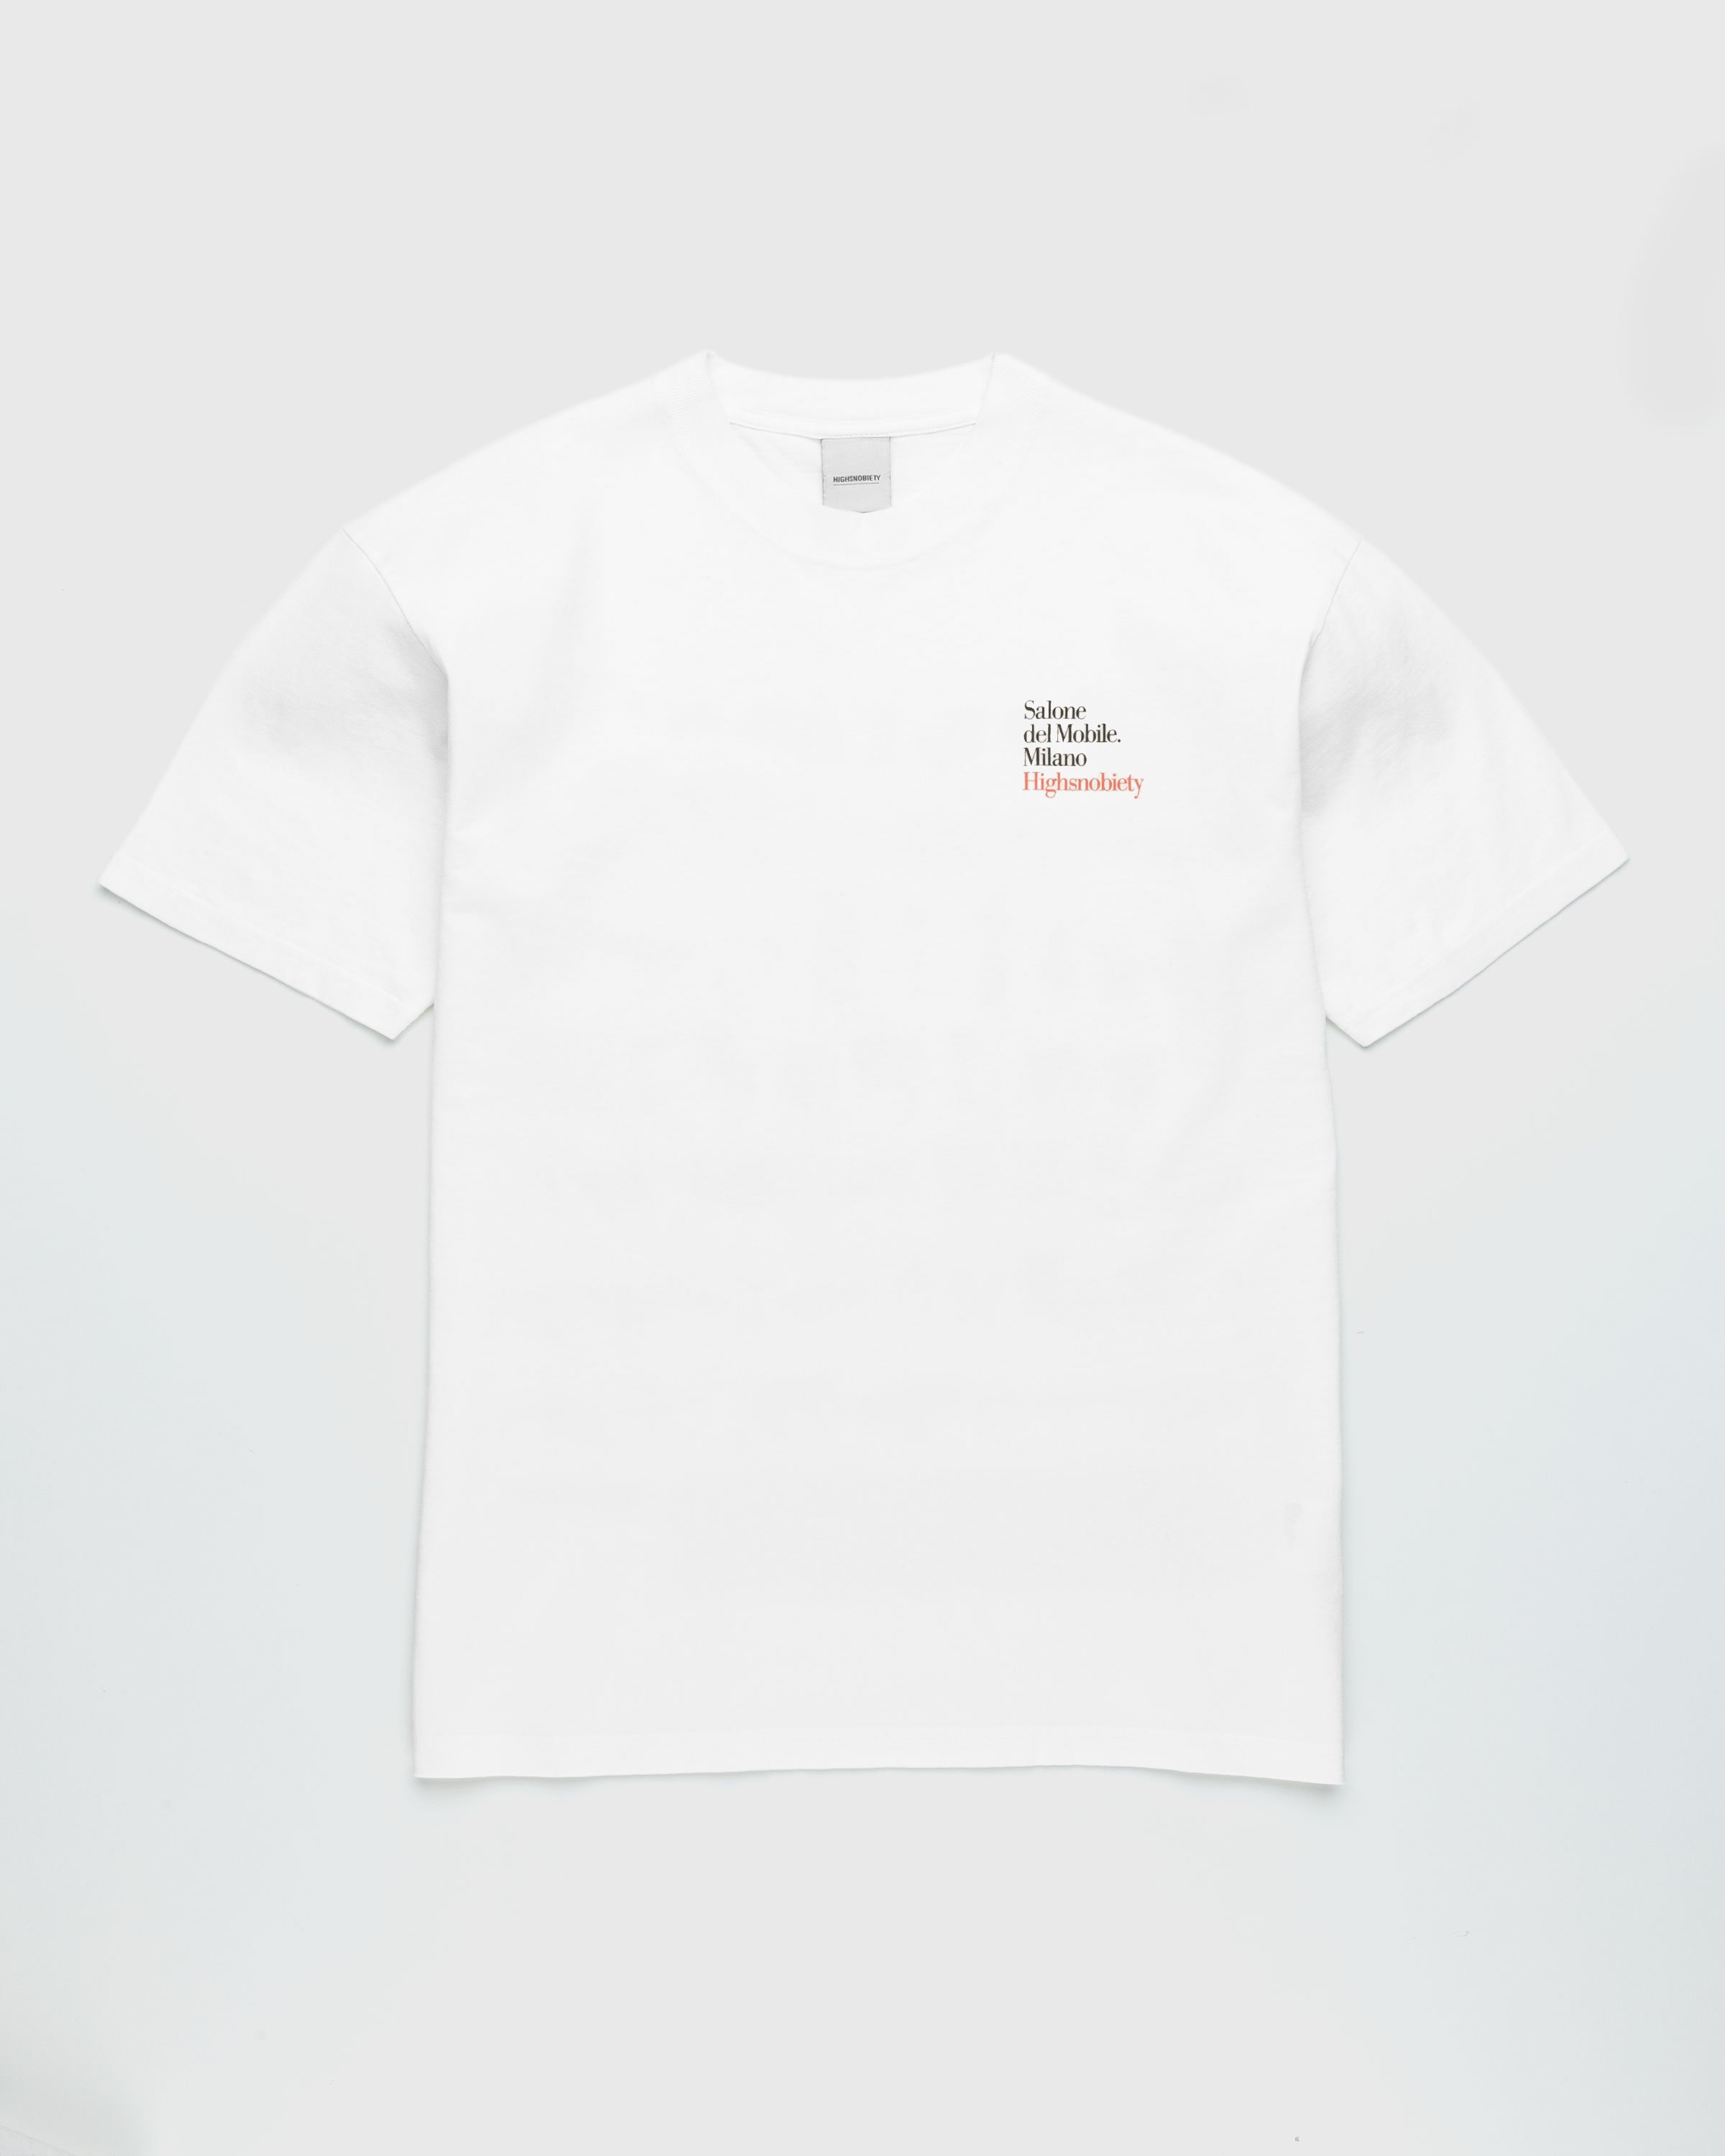 Salone del Mobile x Highsnobiety - Graphic T-Shirt White - Clothing - White - Image 2